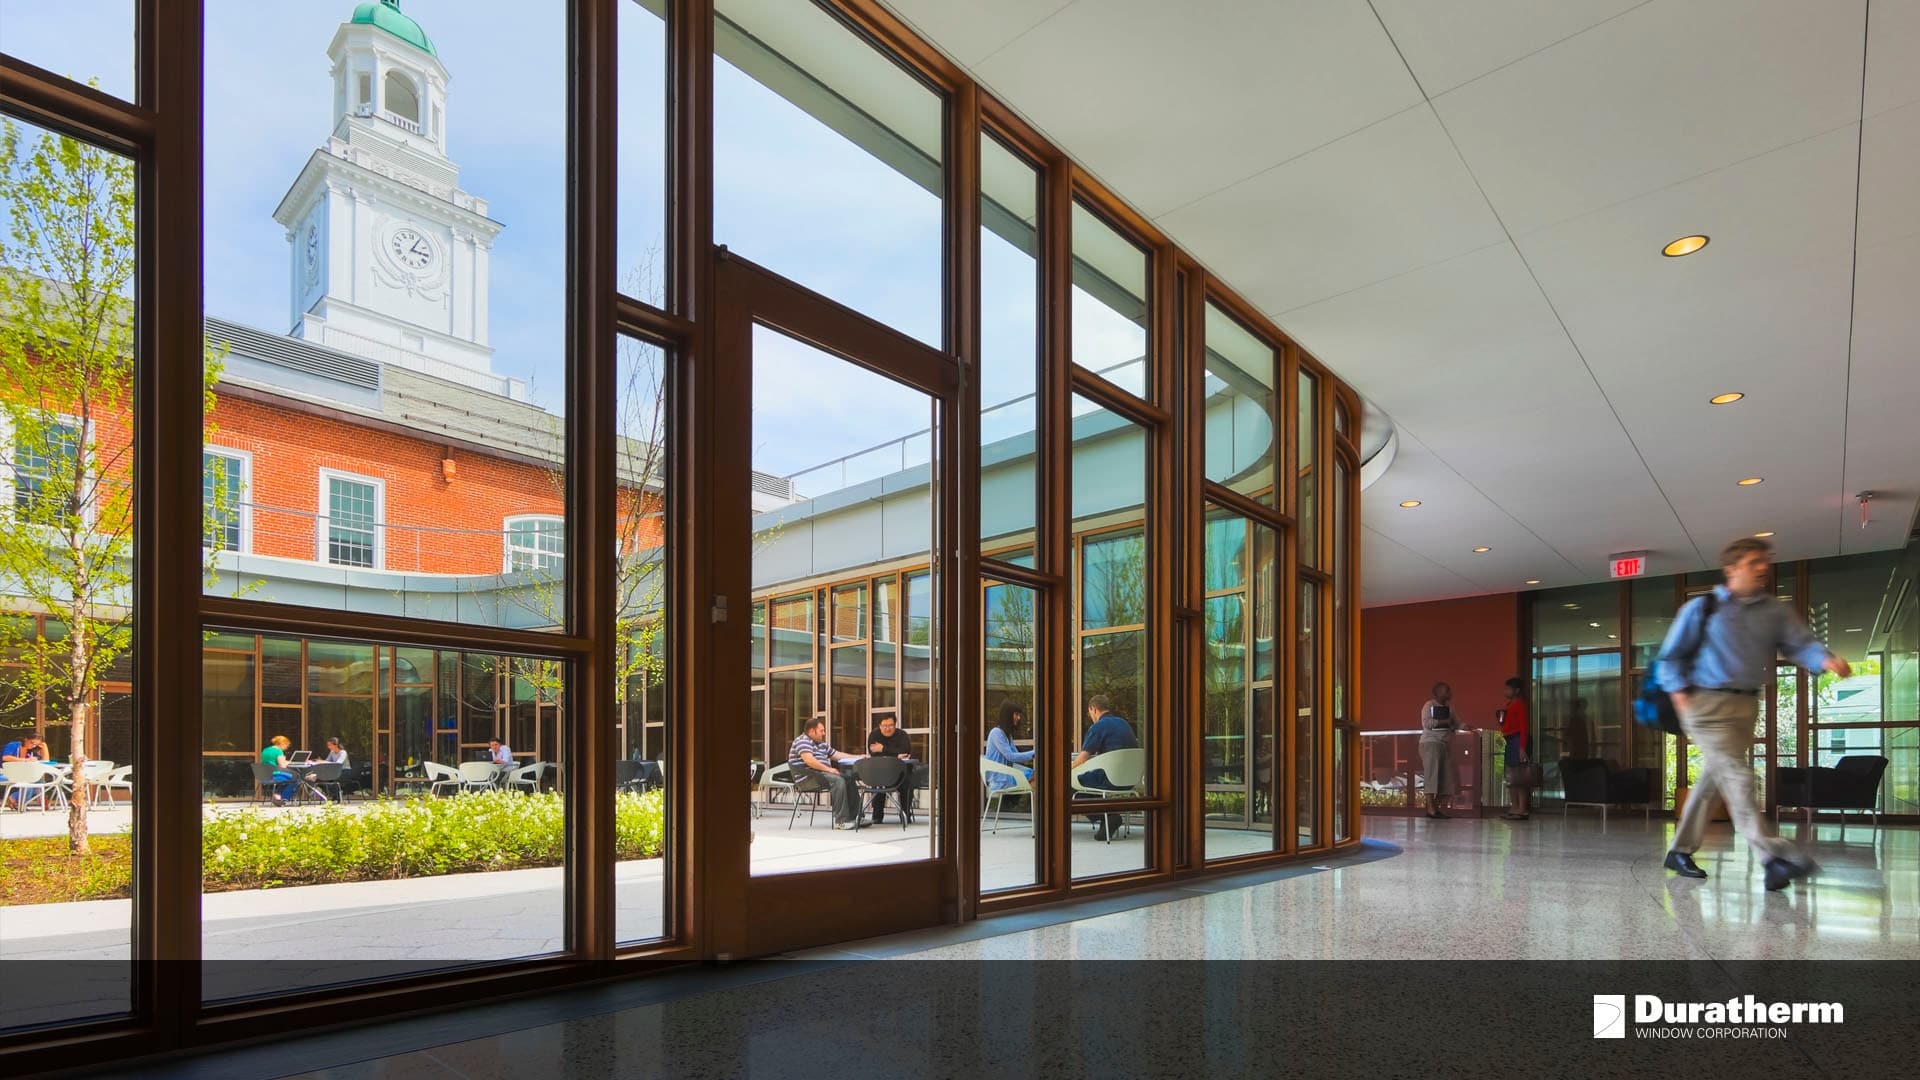 the interior of a college hallway with floor-to-ceiling windows and doors